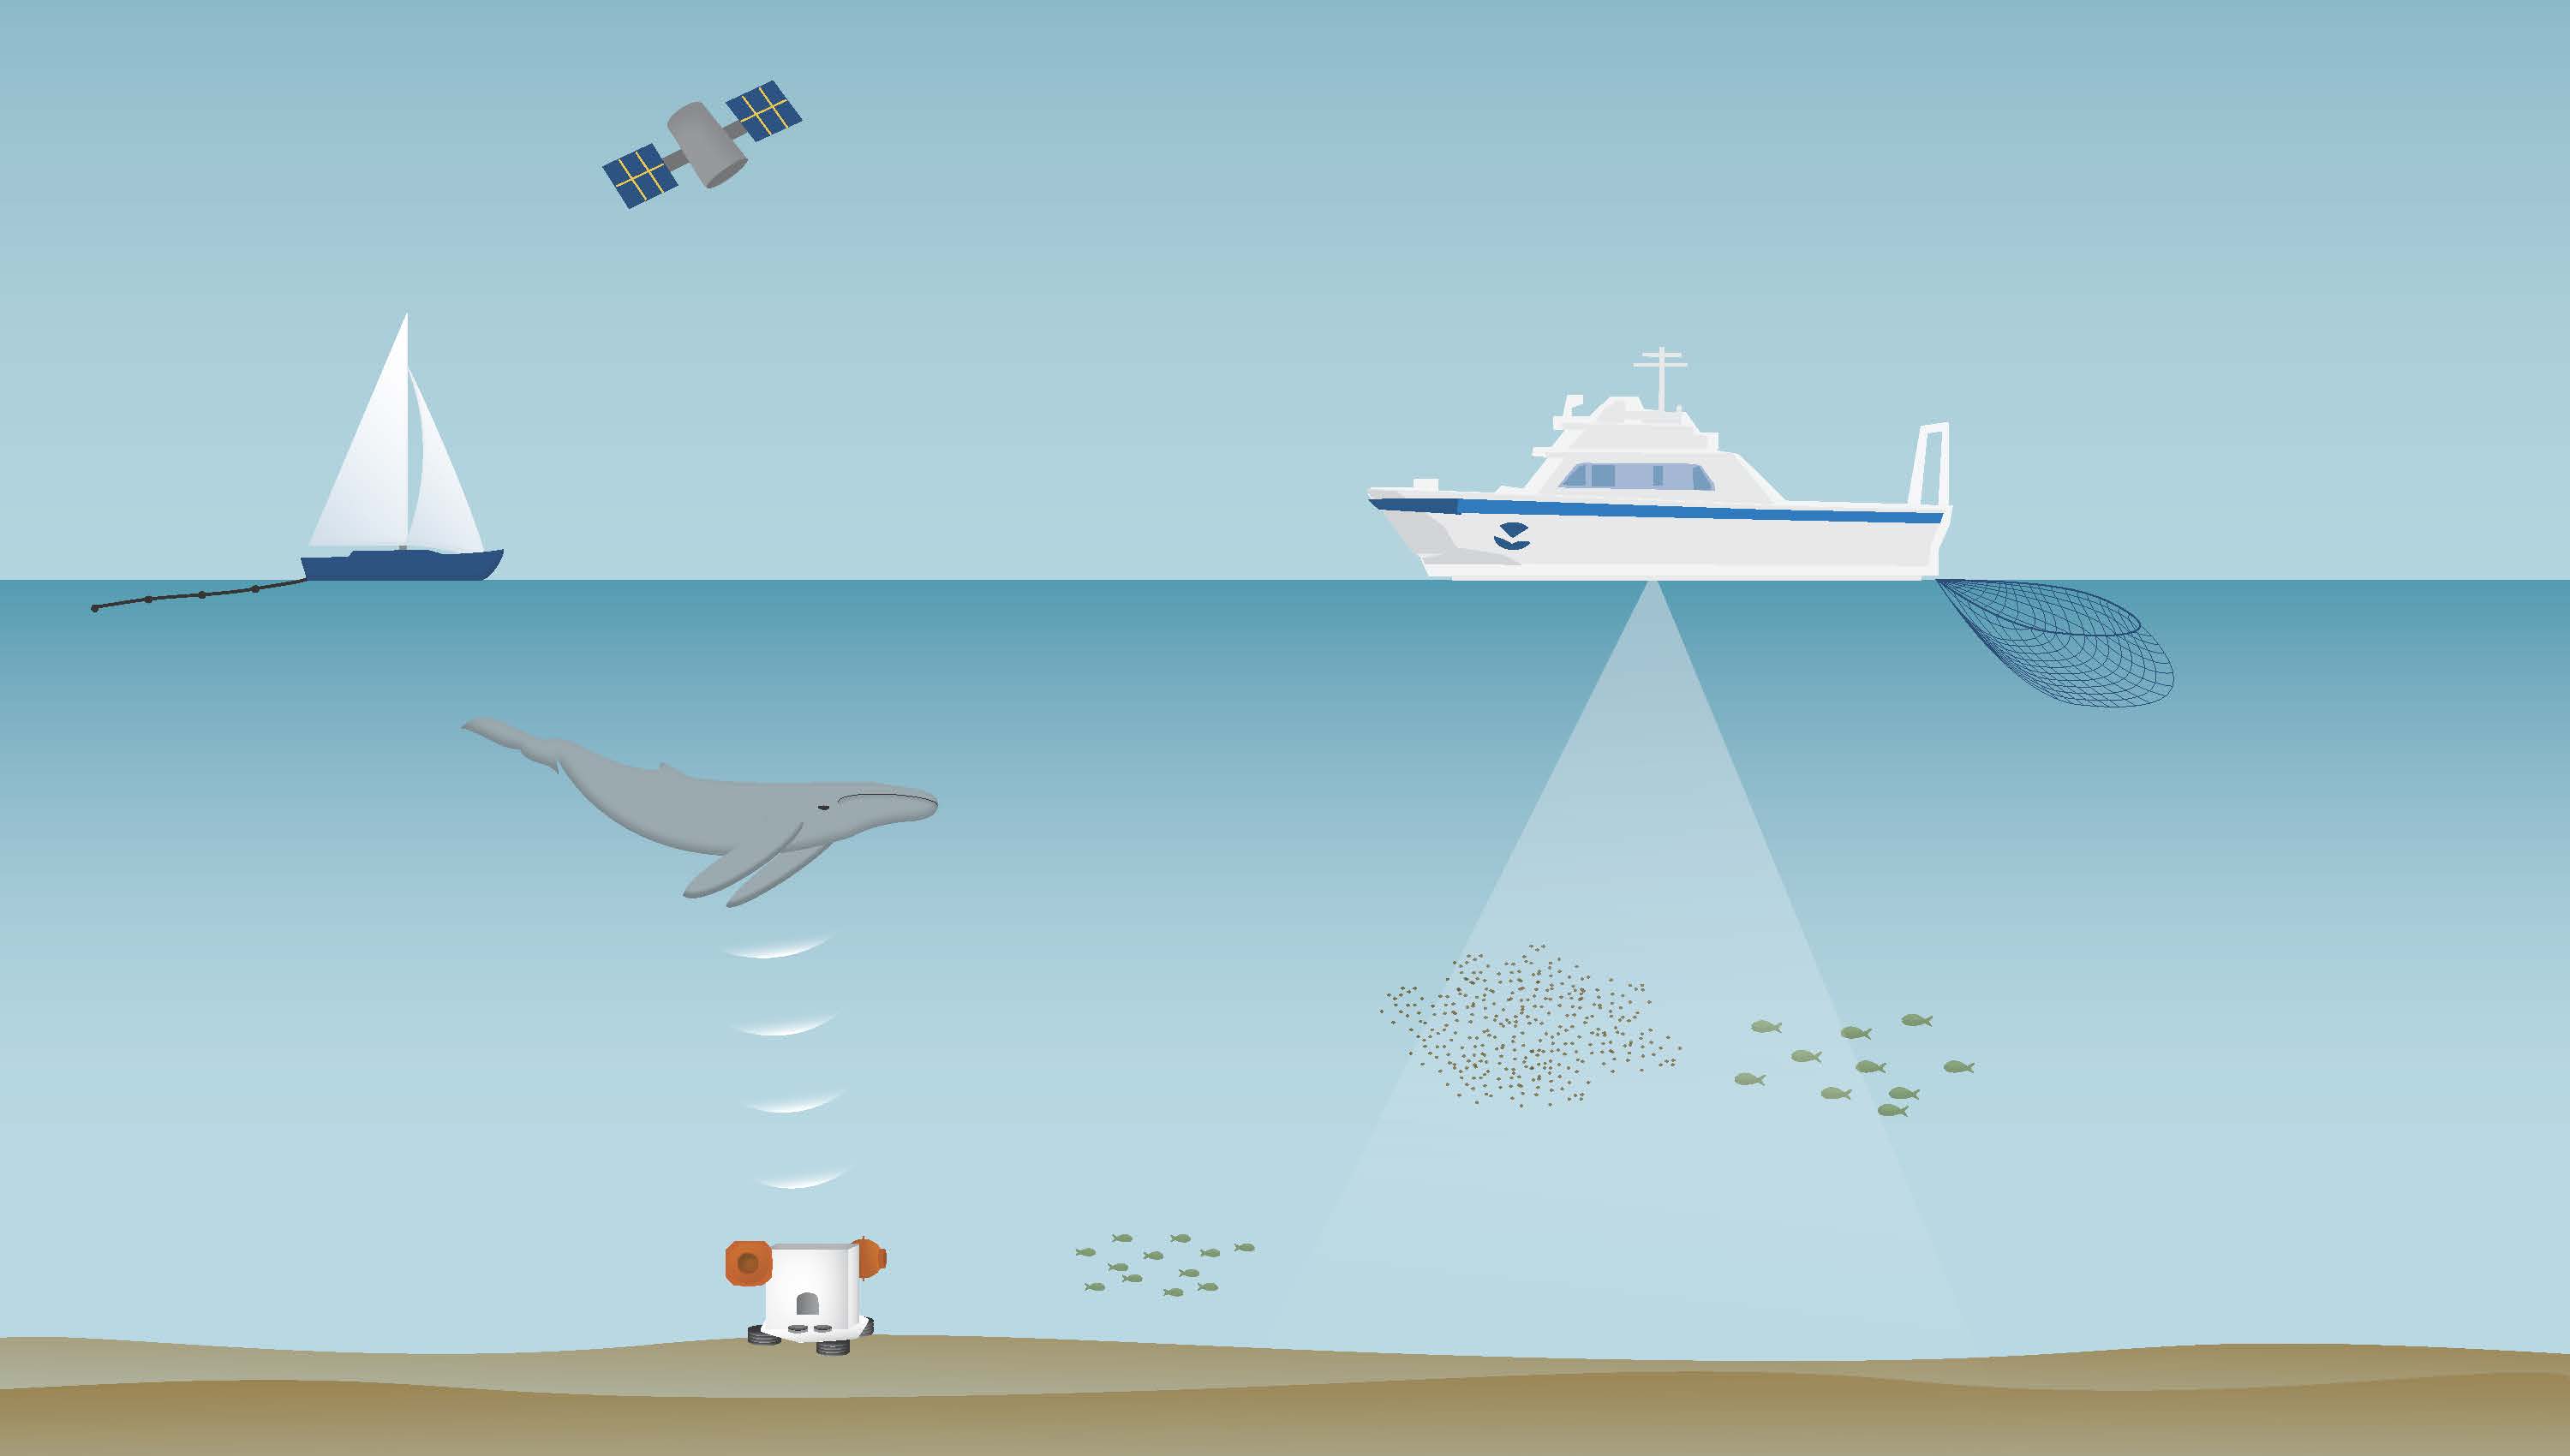 The ADEON data collection network of vessels, satellites, and ocean bottom landers